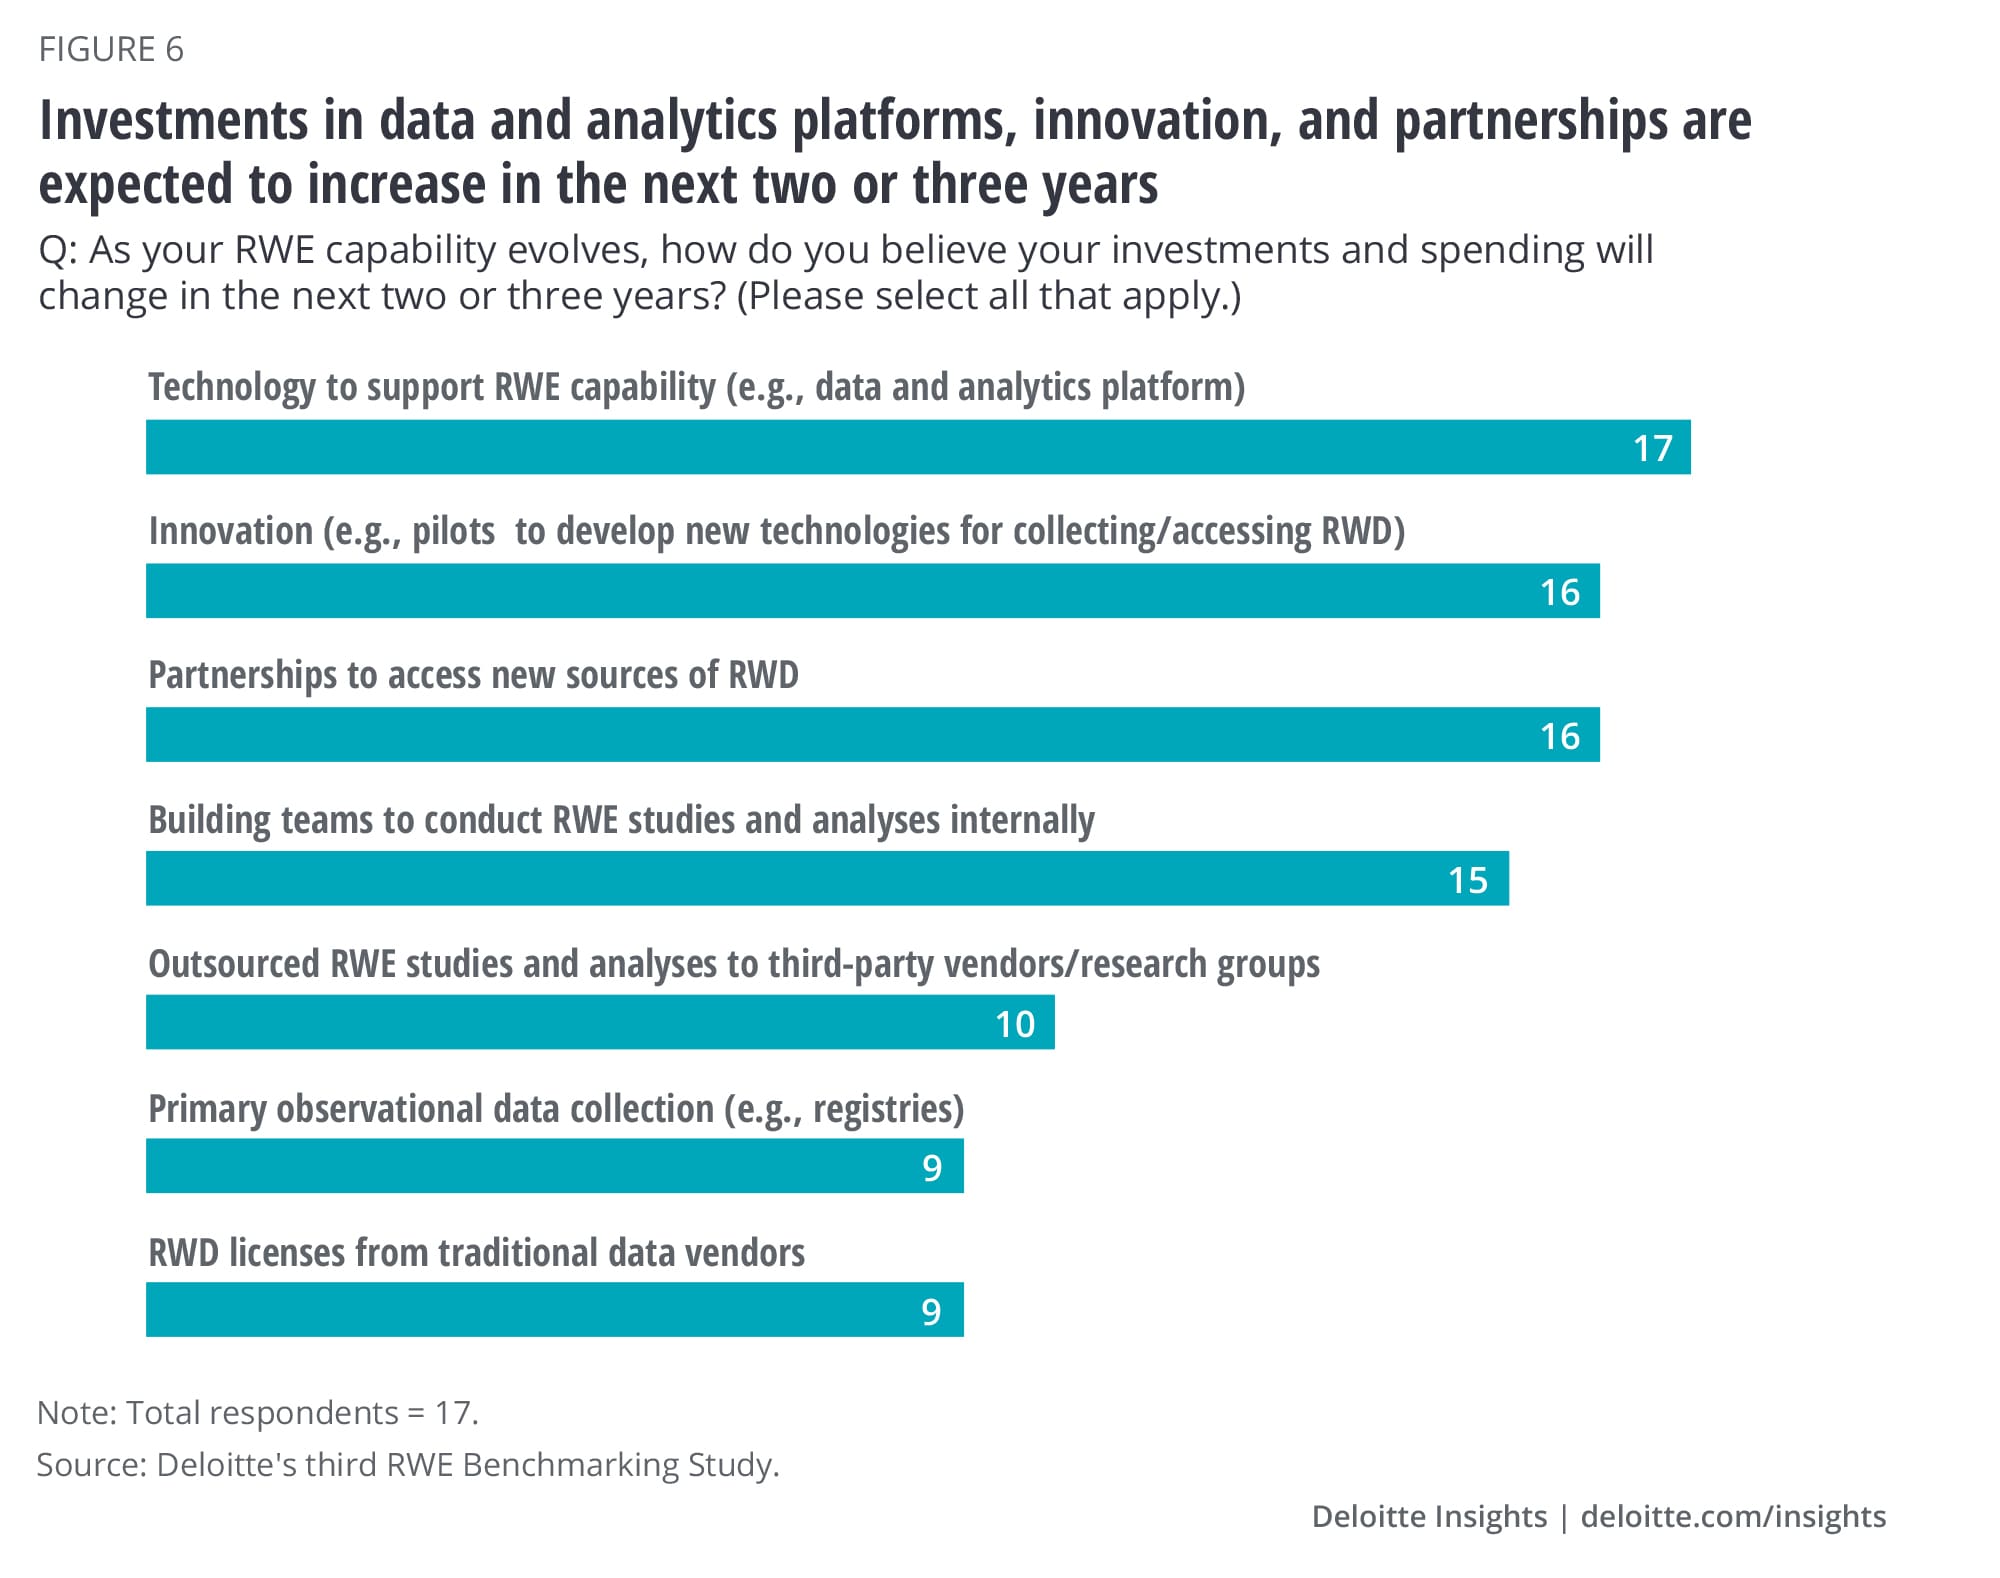 Investments in data and analytics platforms, innovation, and partnerships are expected to increase in the next two or three years